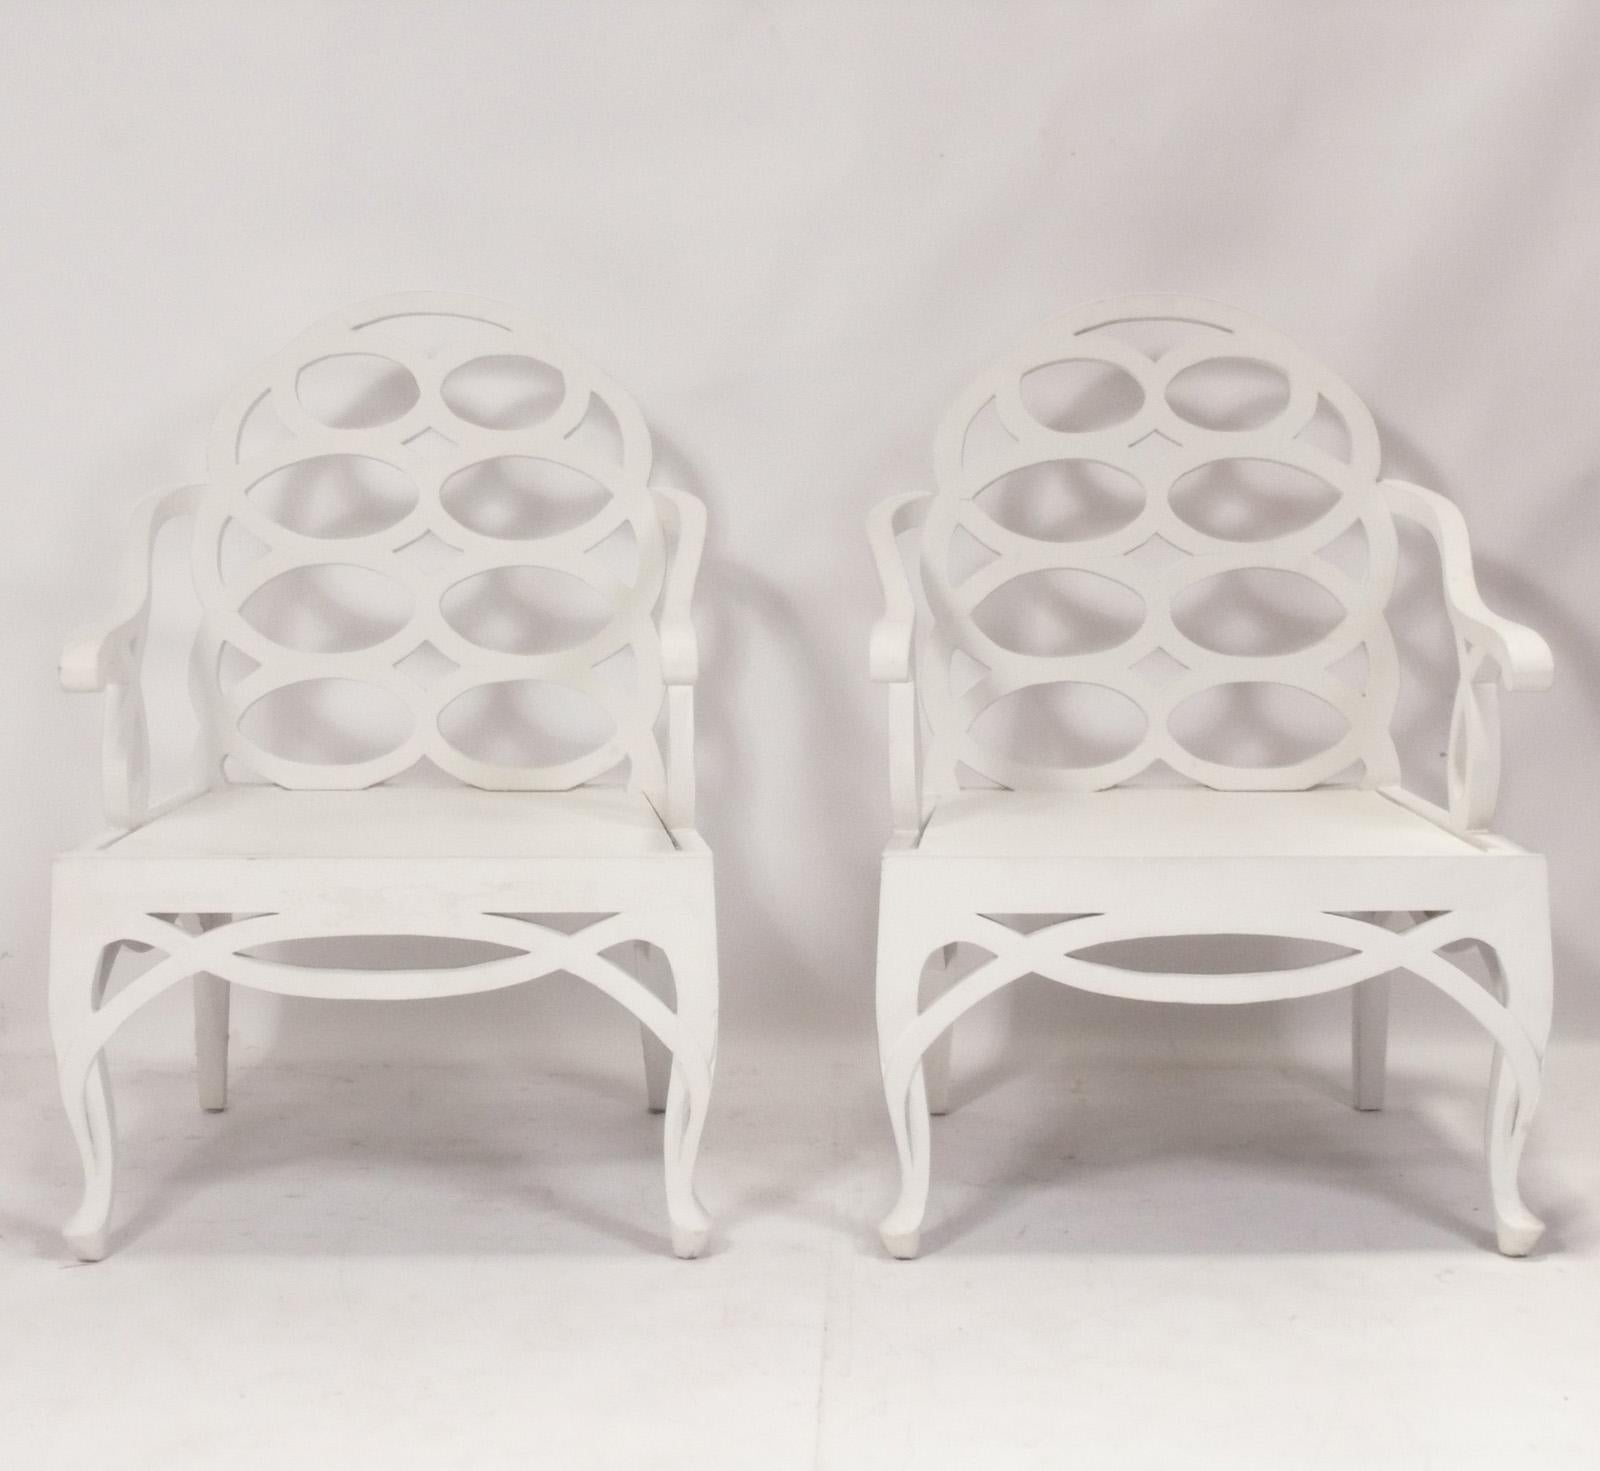 Pair of Large Scale Loop Armchairs, in the style of Frances Elkins, American, circa 2000s. These chairs are based on the 1930s design by Frances Elkins, but made at a slightly larger scale. They are currently being refinished and can be completed in